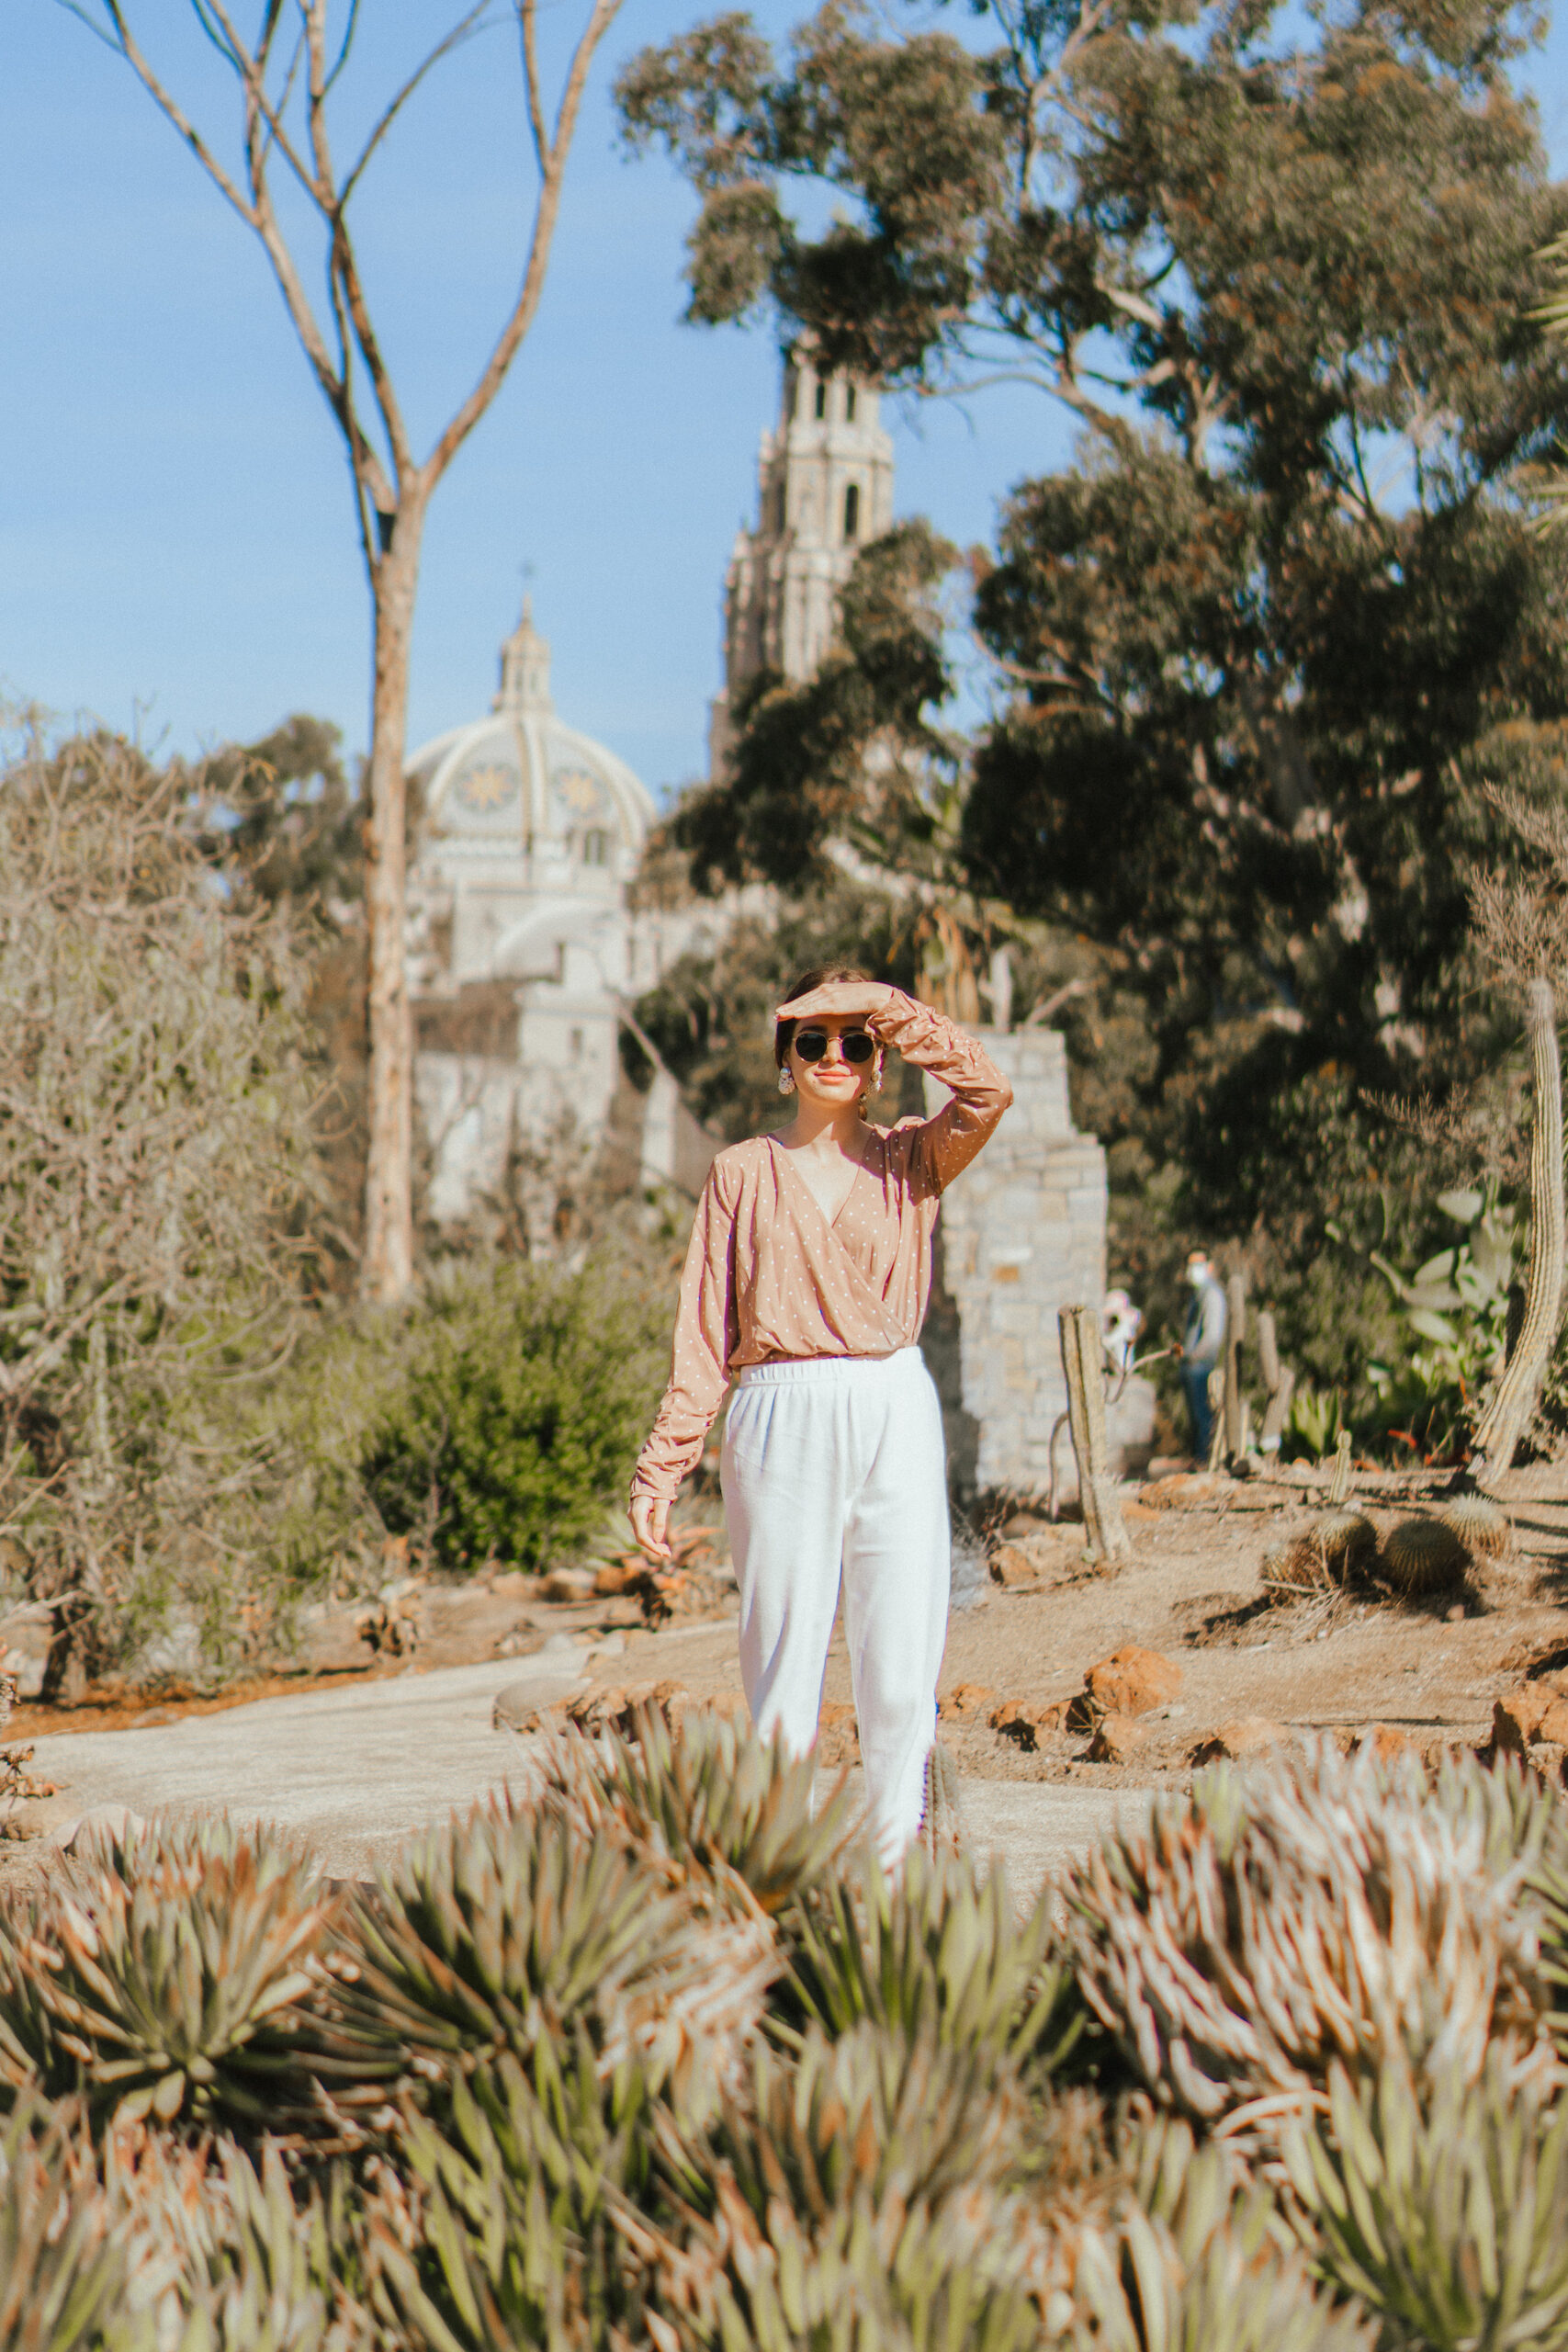 Things to do in Balboa Park: How to spend one day at San Diego's top attraction Palm Trees and Pellegrino San Diego travel tips - The Old Cactus Garden in Balboa Park